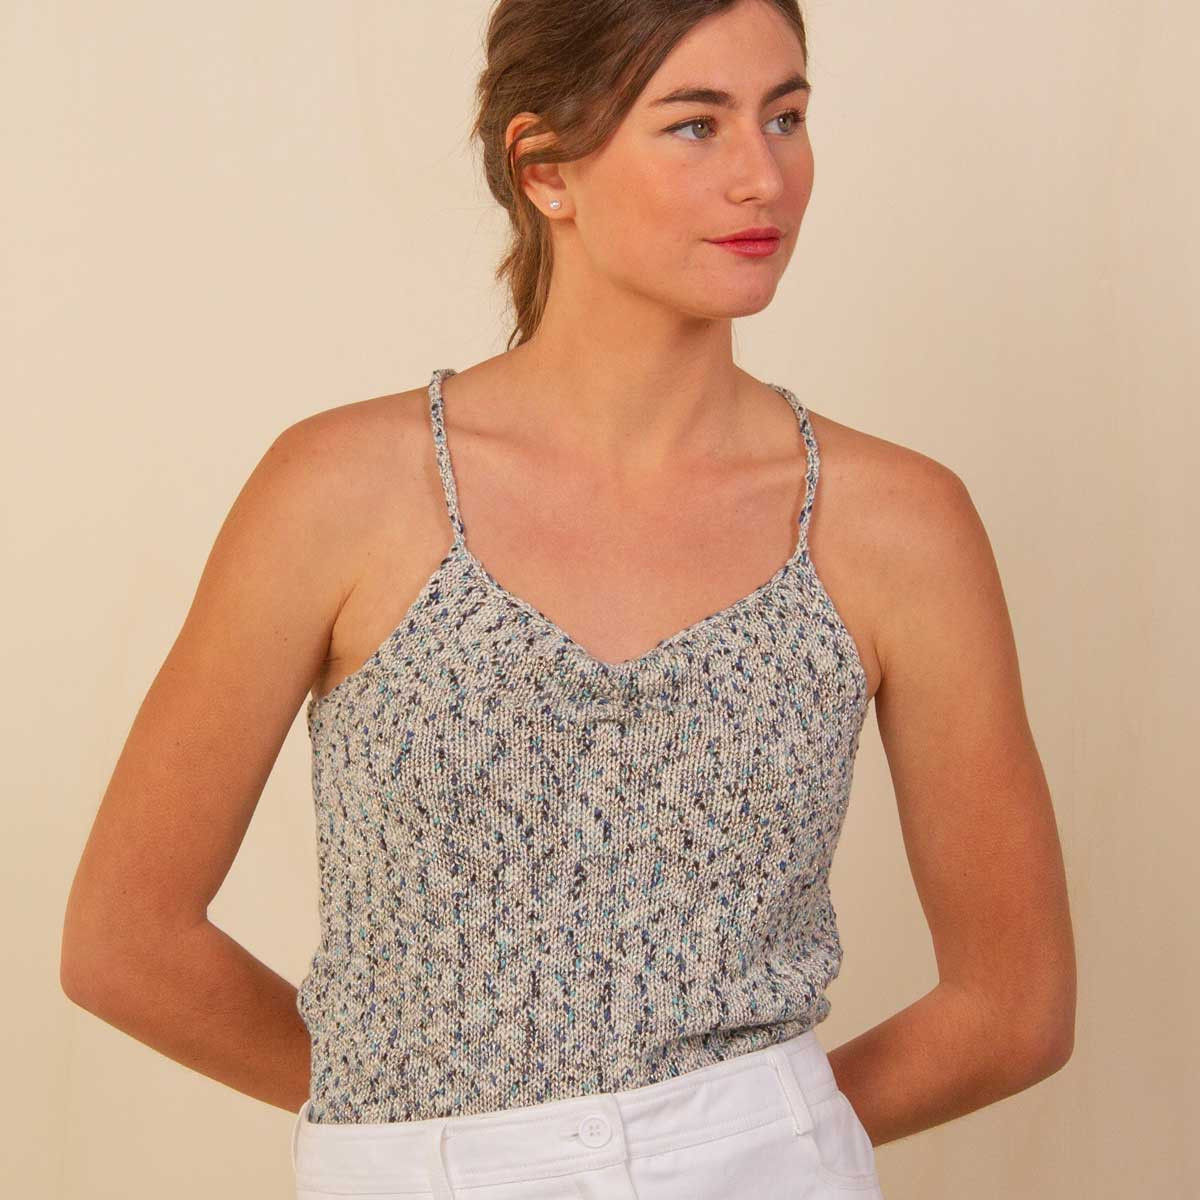 Women's top to knit